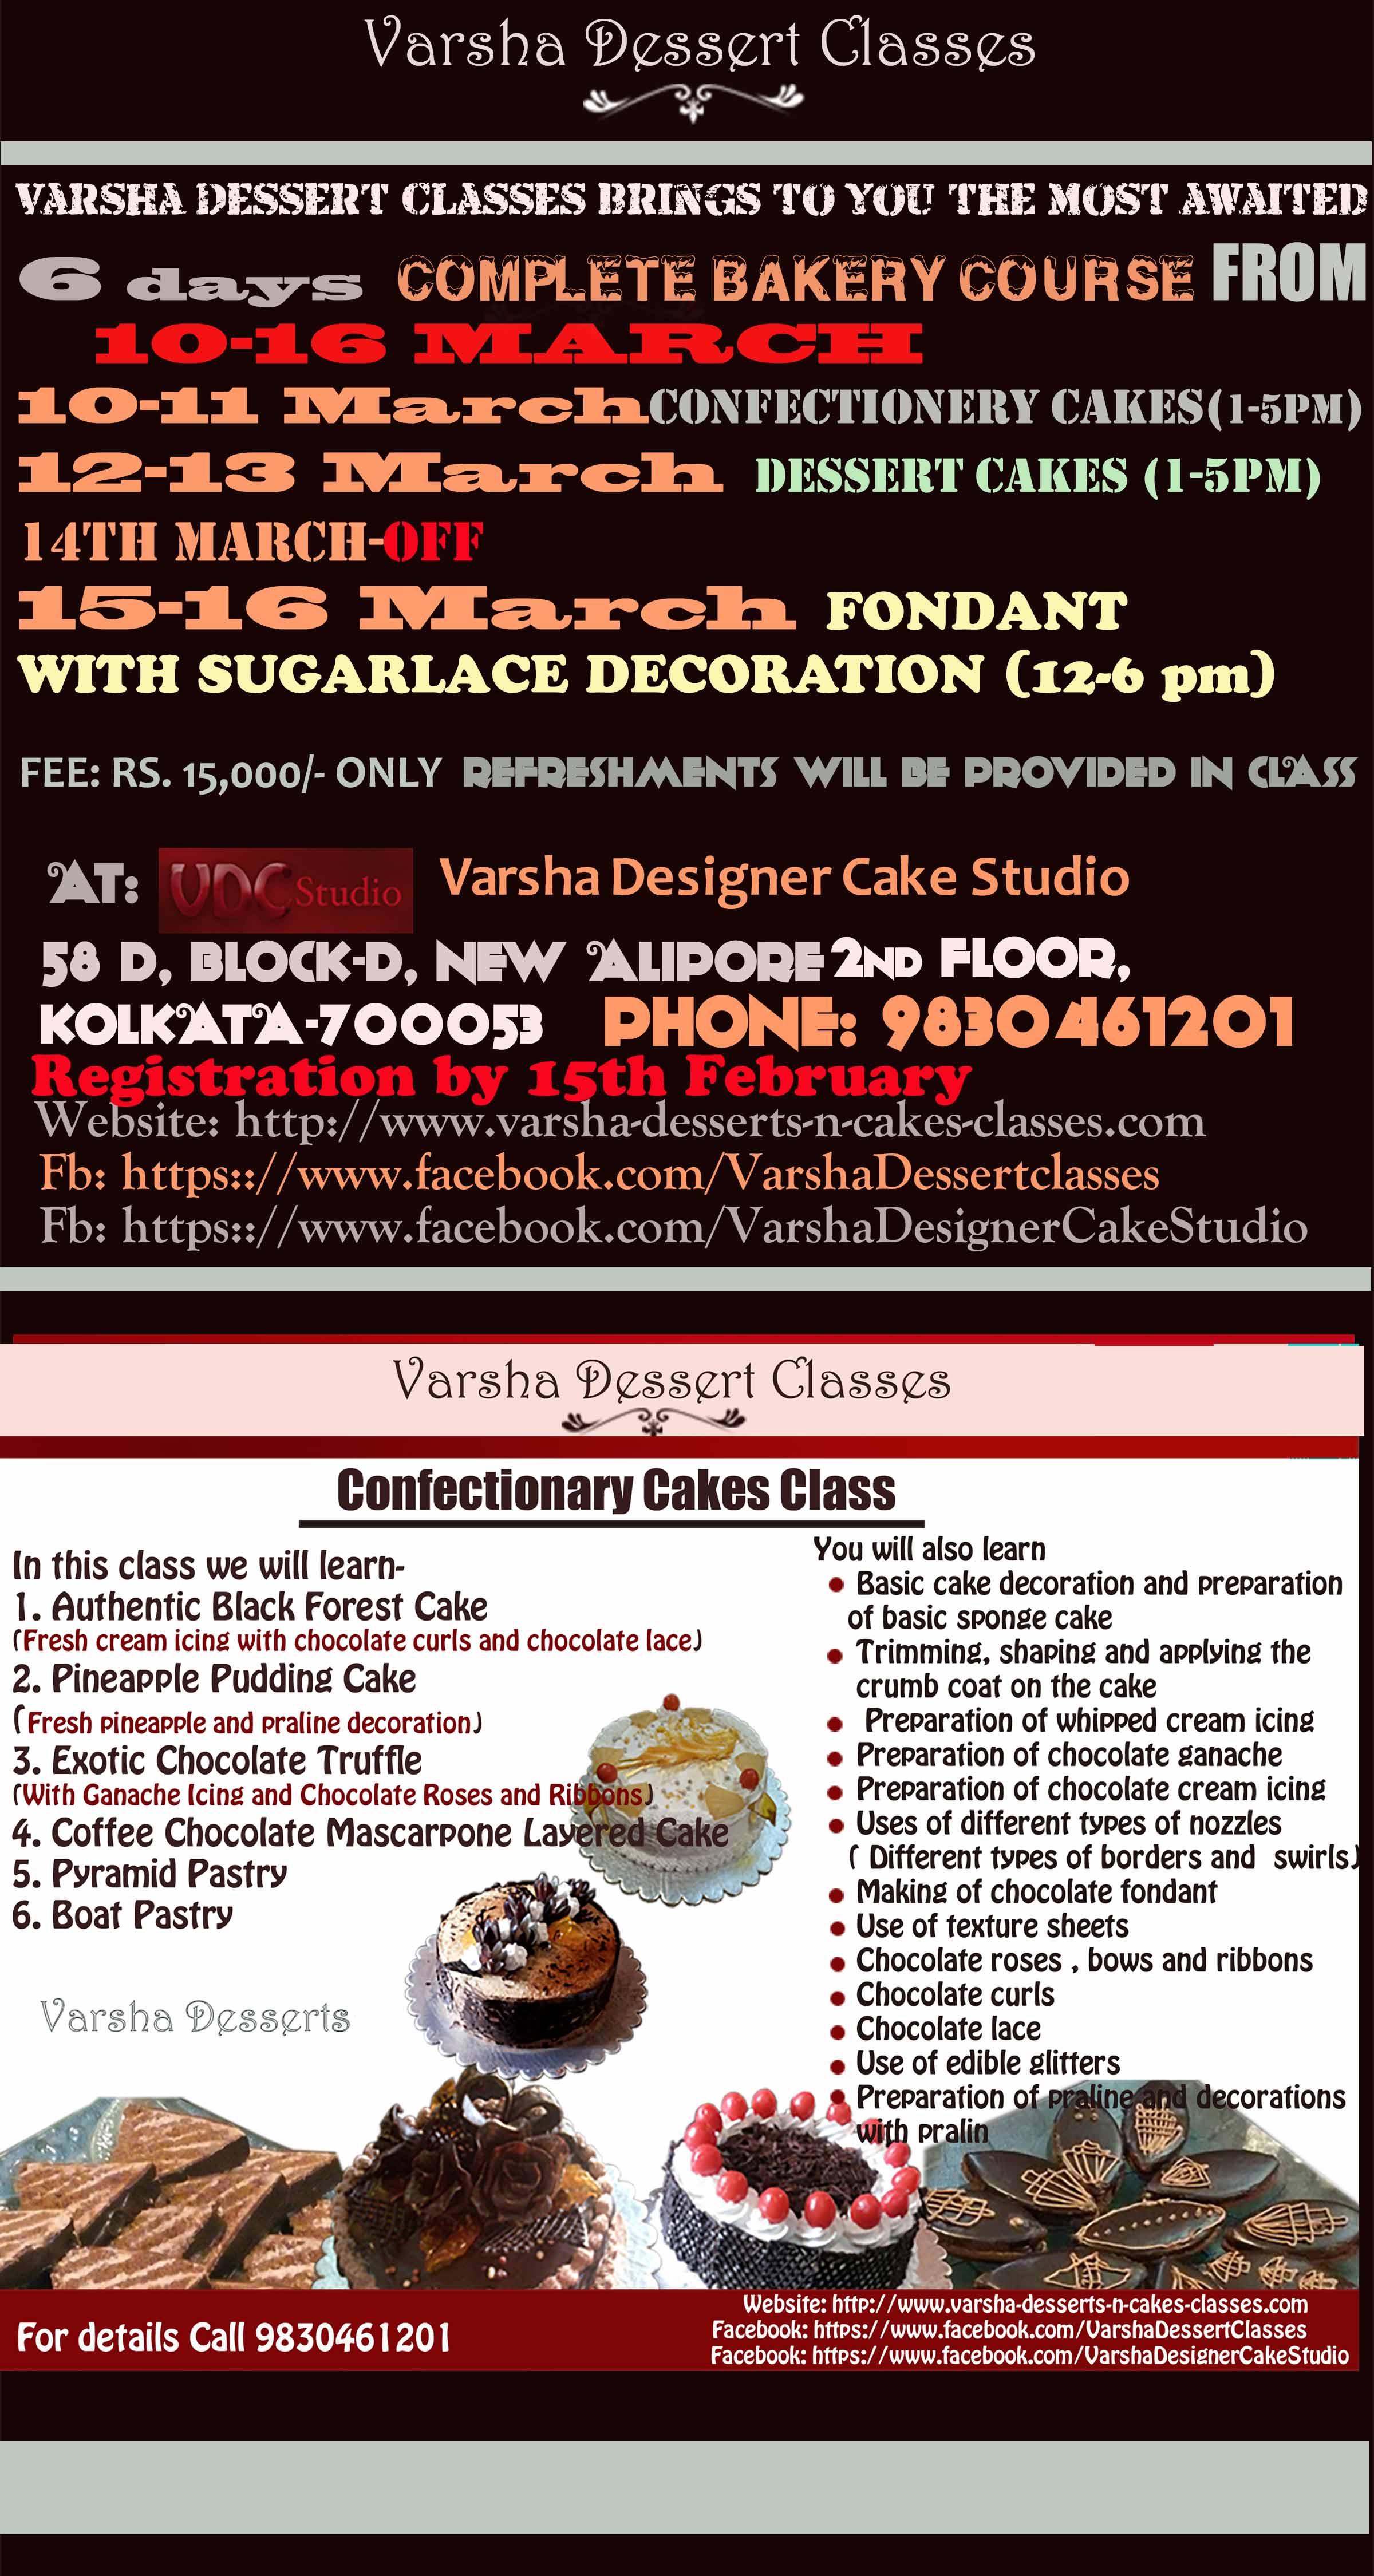 COMPLETE BAKING COURSE FROM 10TH TO 16TH MARCH